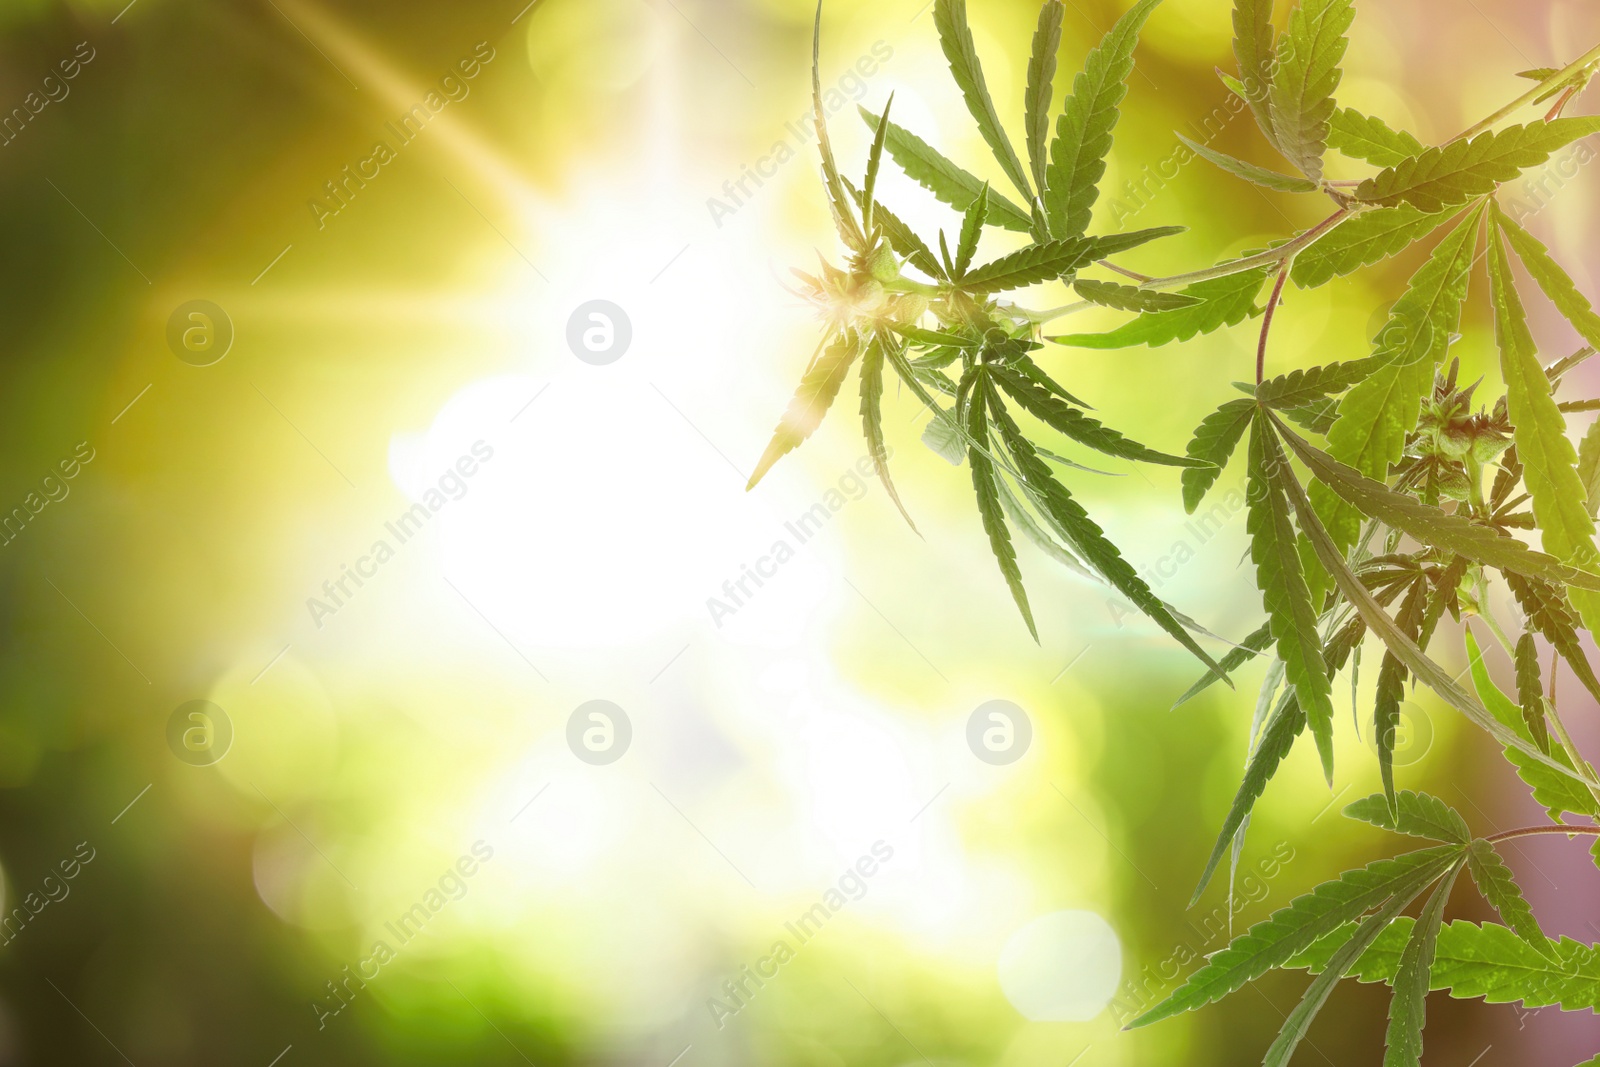 Image of Green hemp plant on blurred background, closeup. Space for text